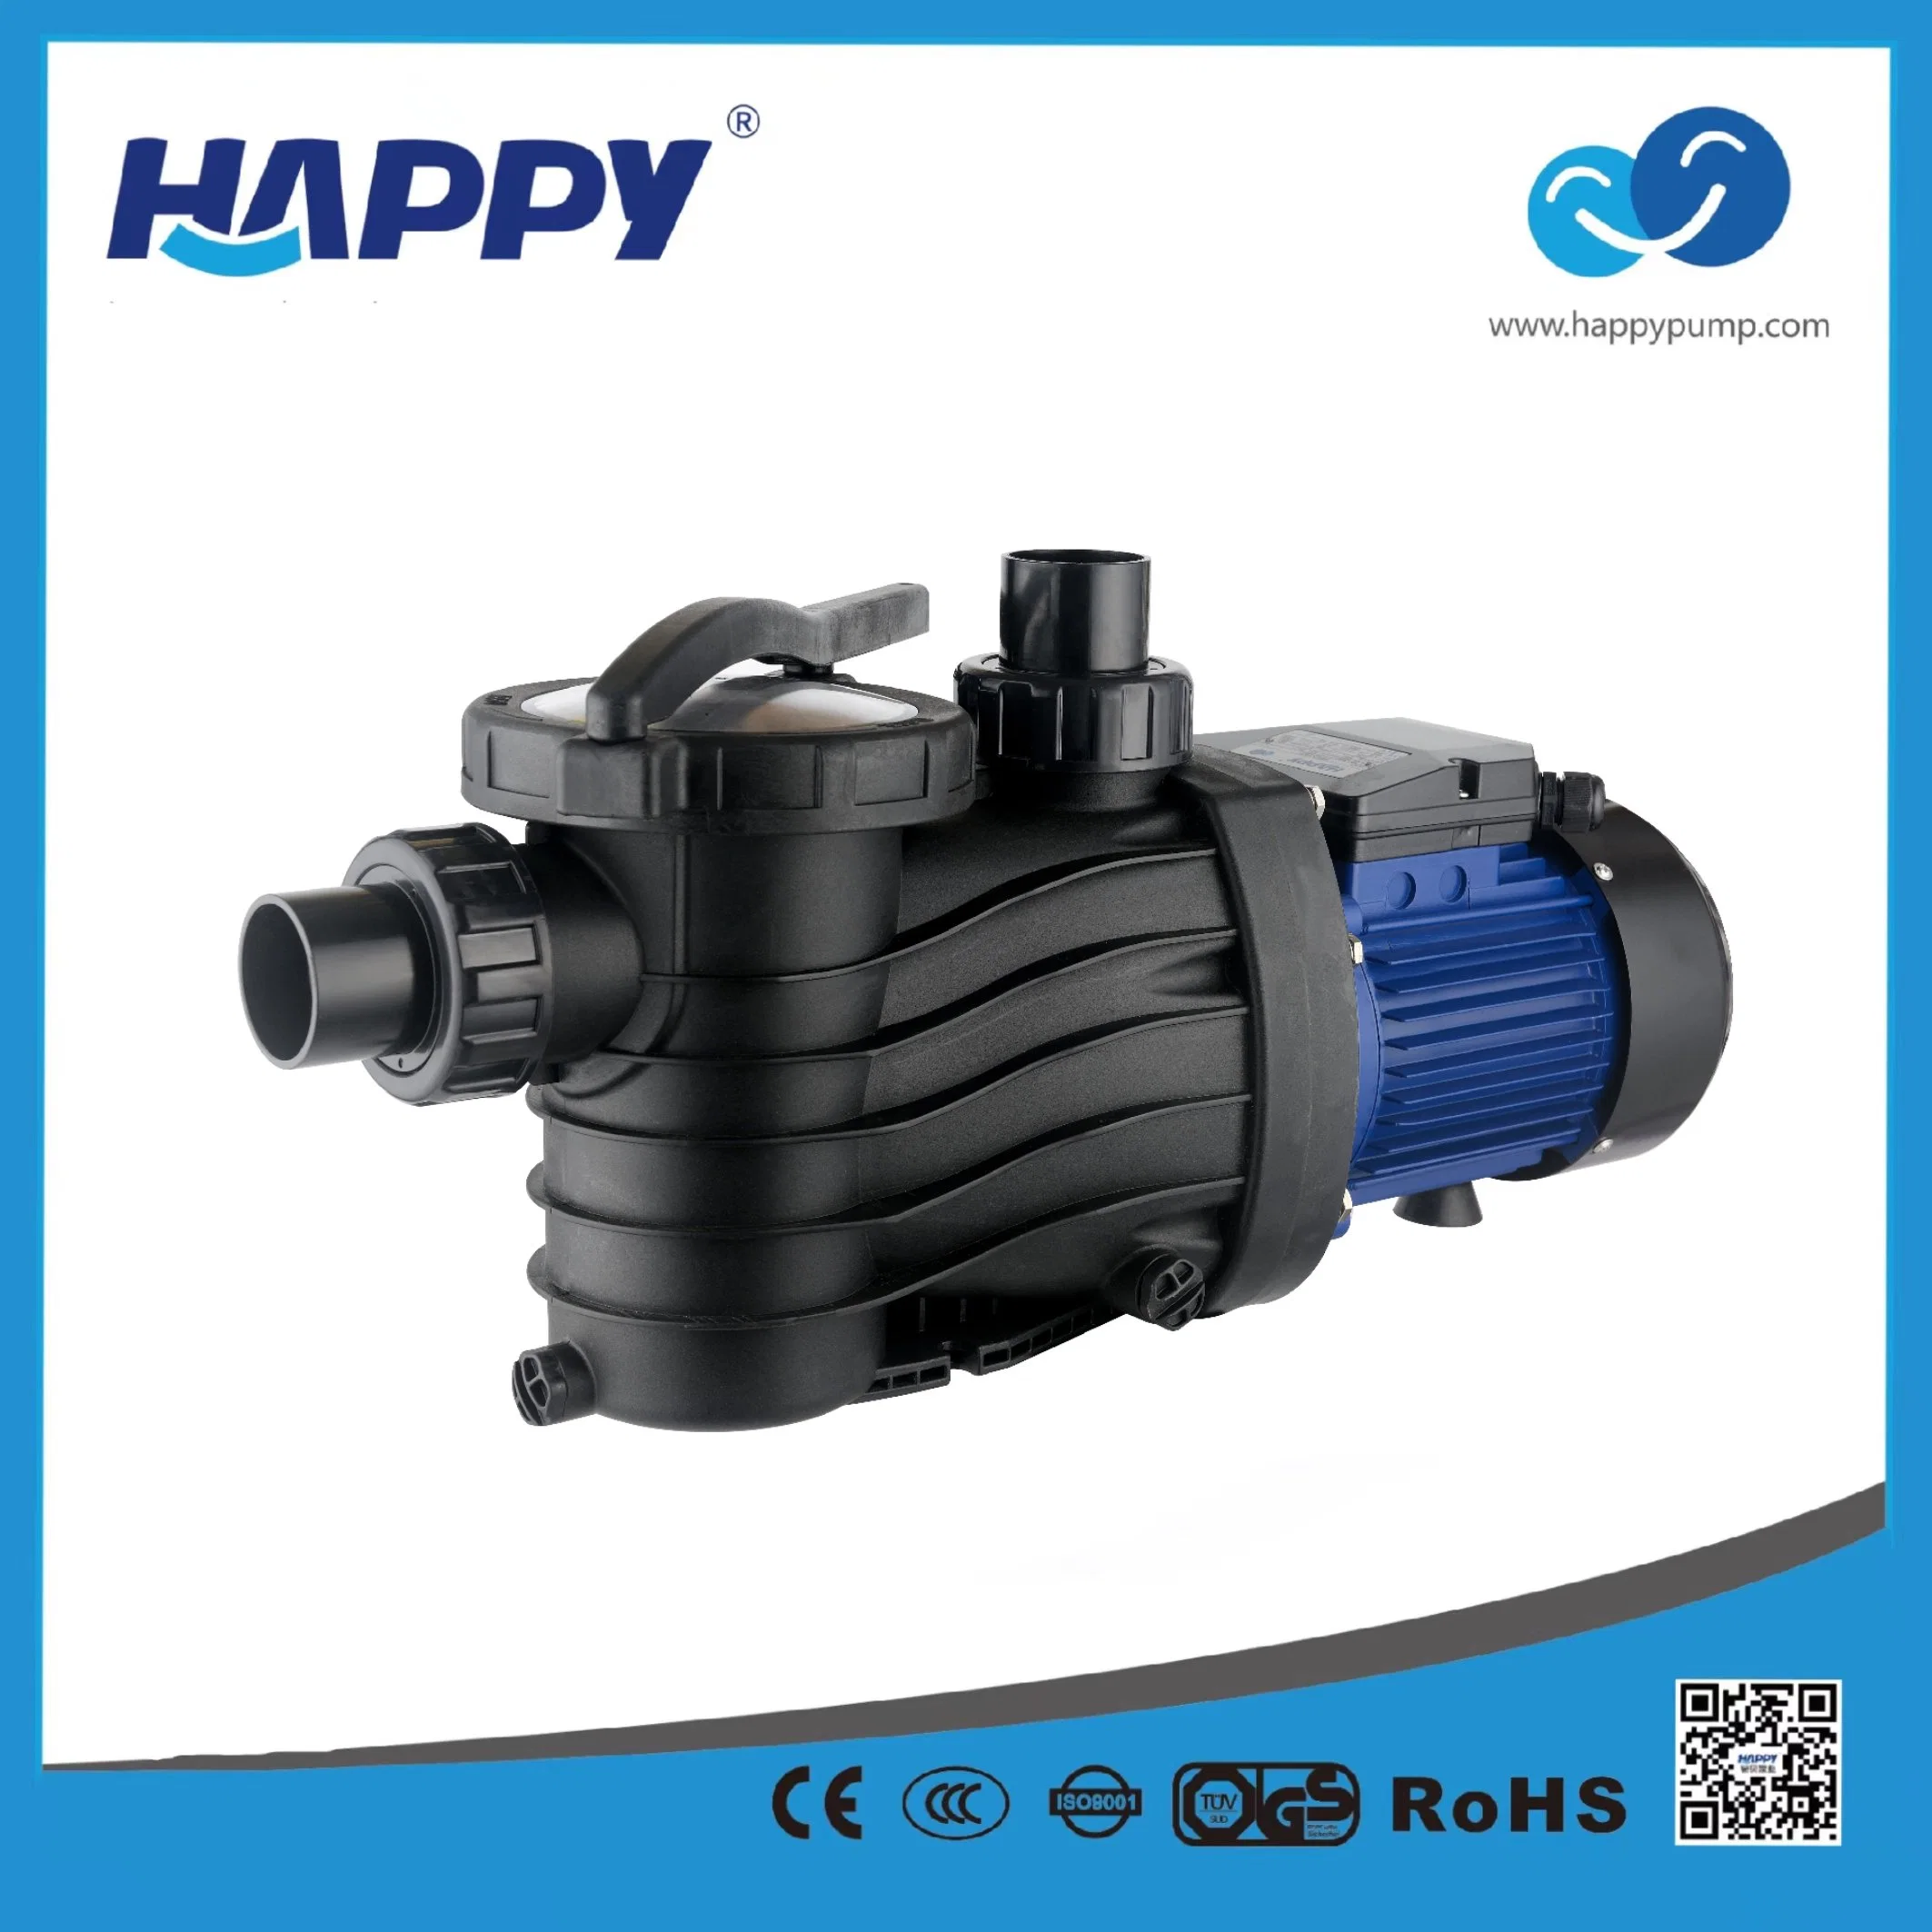 Submersible Self-Priming Pressure Electric Centrifugal Swimming Pool Water Pump (HFC1101)